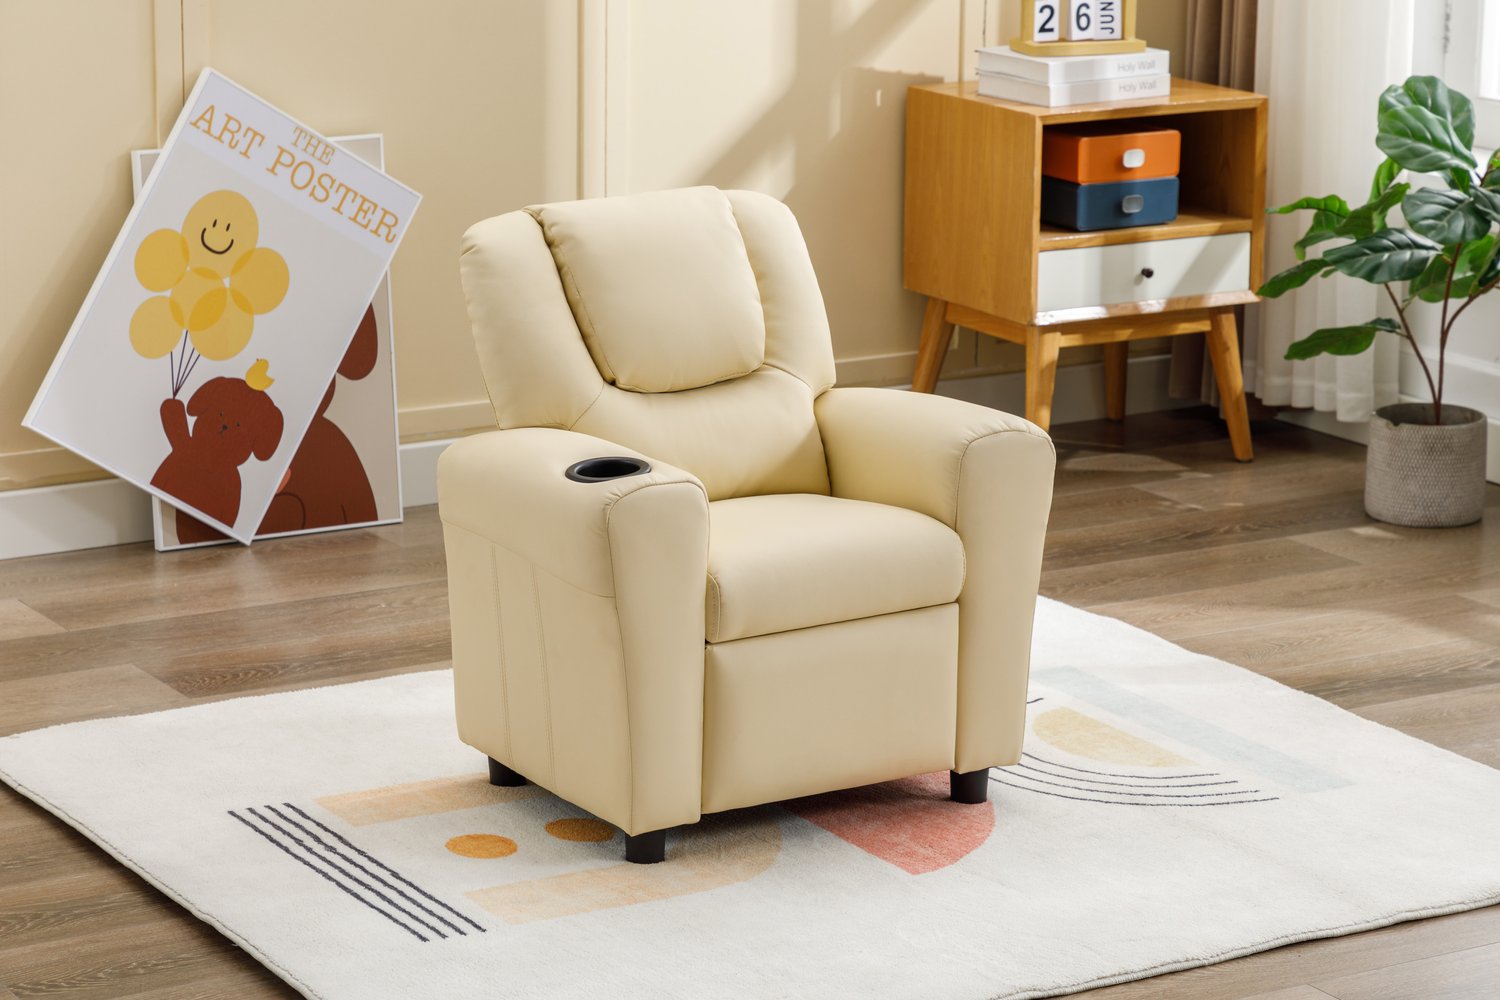 Where To Buy A Child’s Recliner